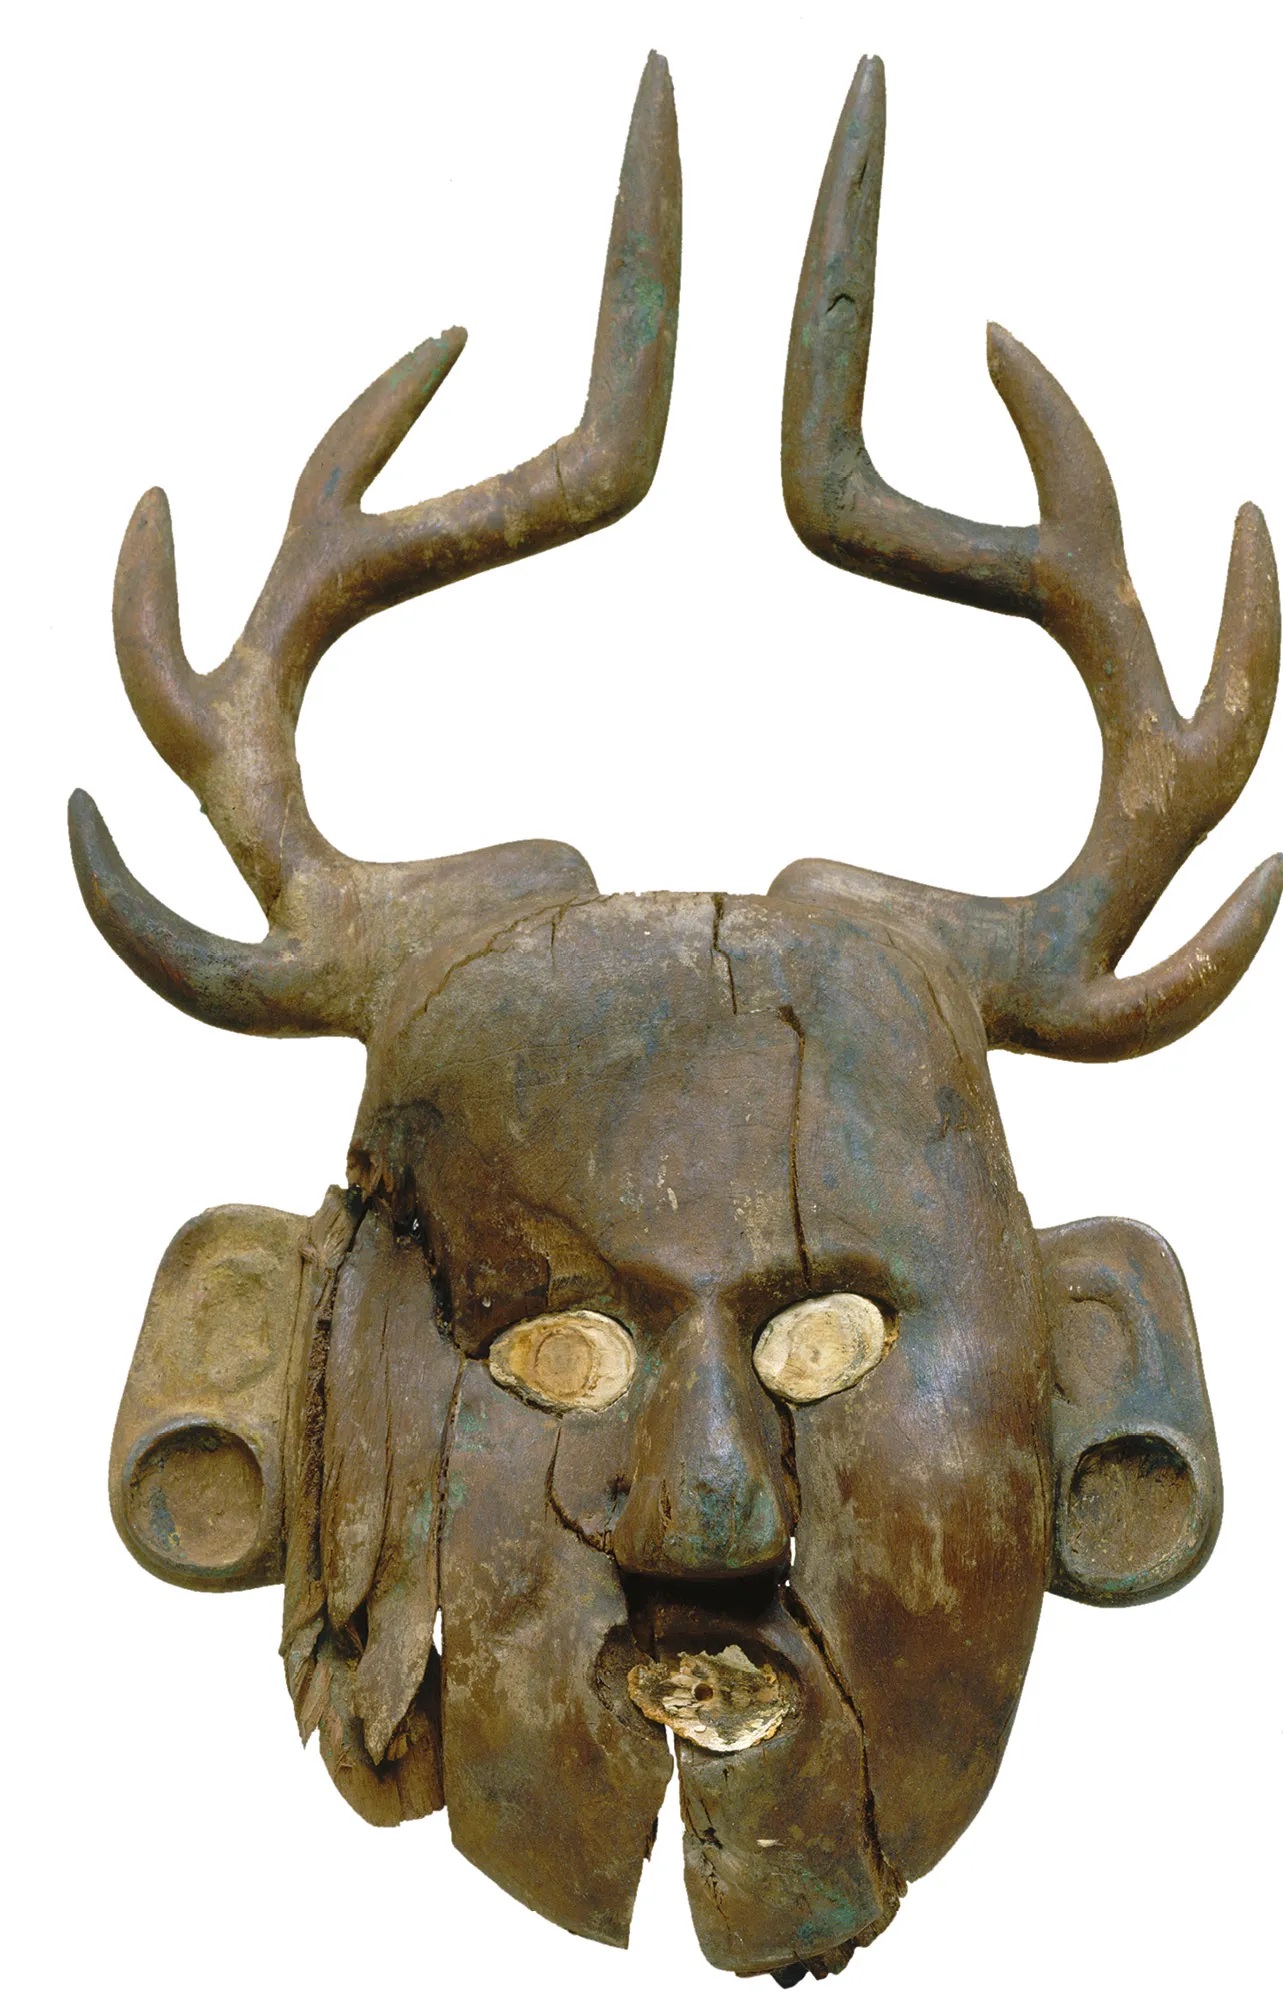 Wooden mask depicting human face with antlers